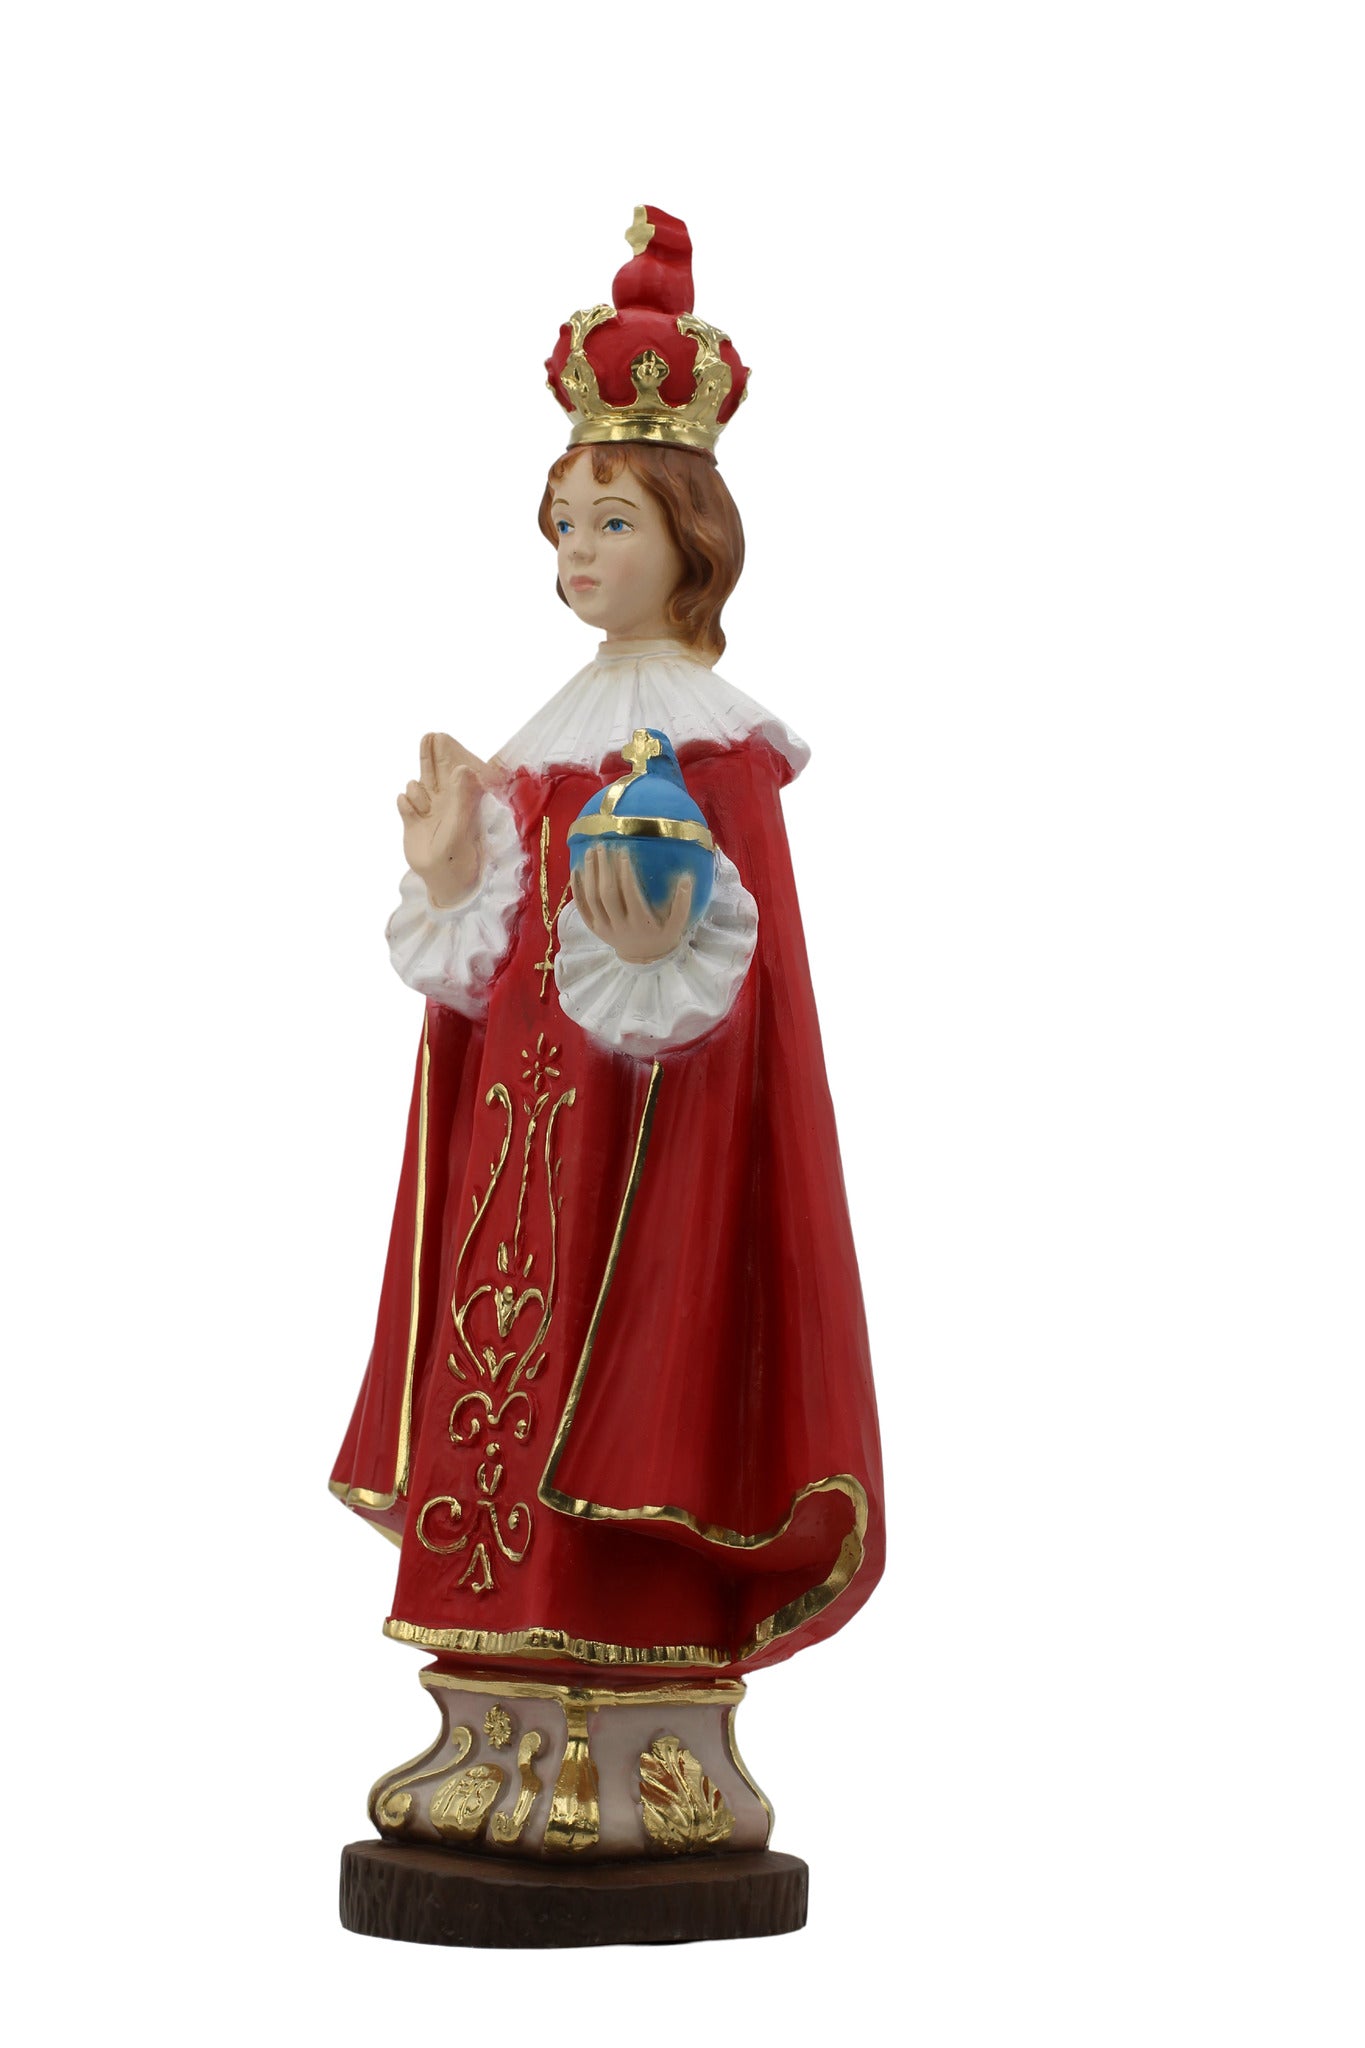 The Faith Gift Shop Infant Jesus of Prague - Tuscan Style Collection- Hand Painted in Italy - Nino Jesus de Praga